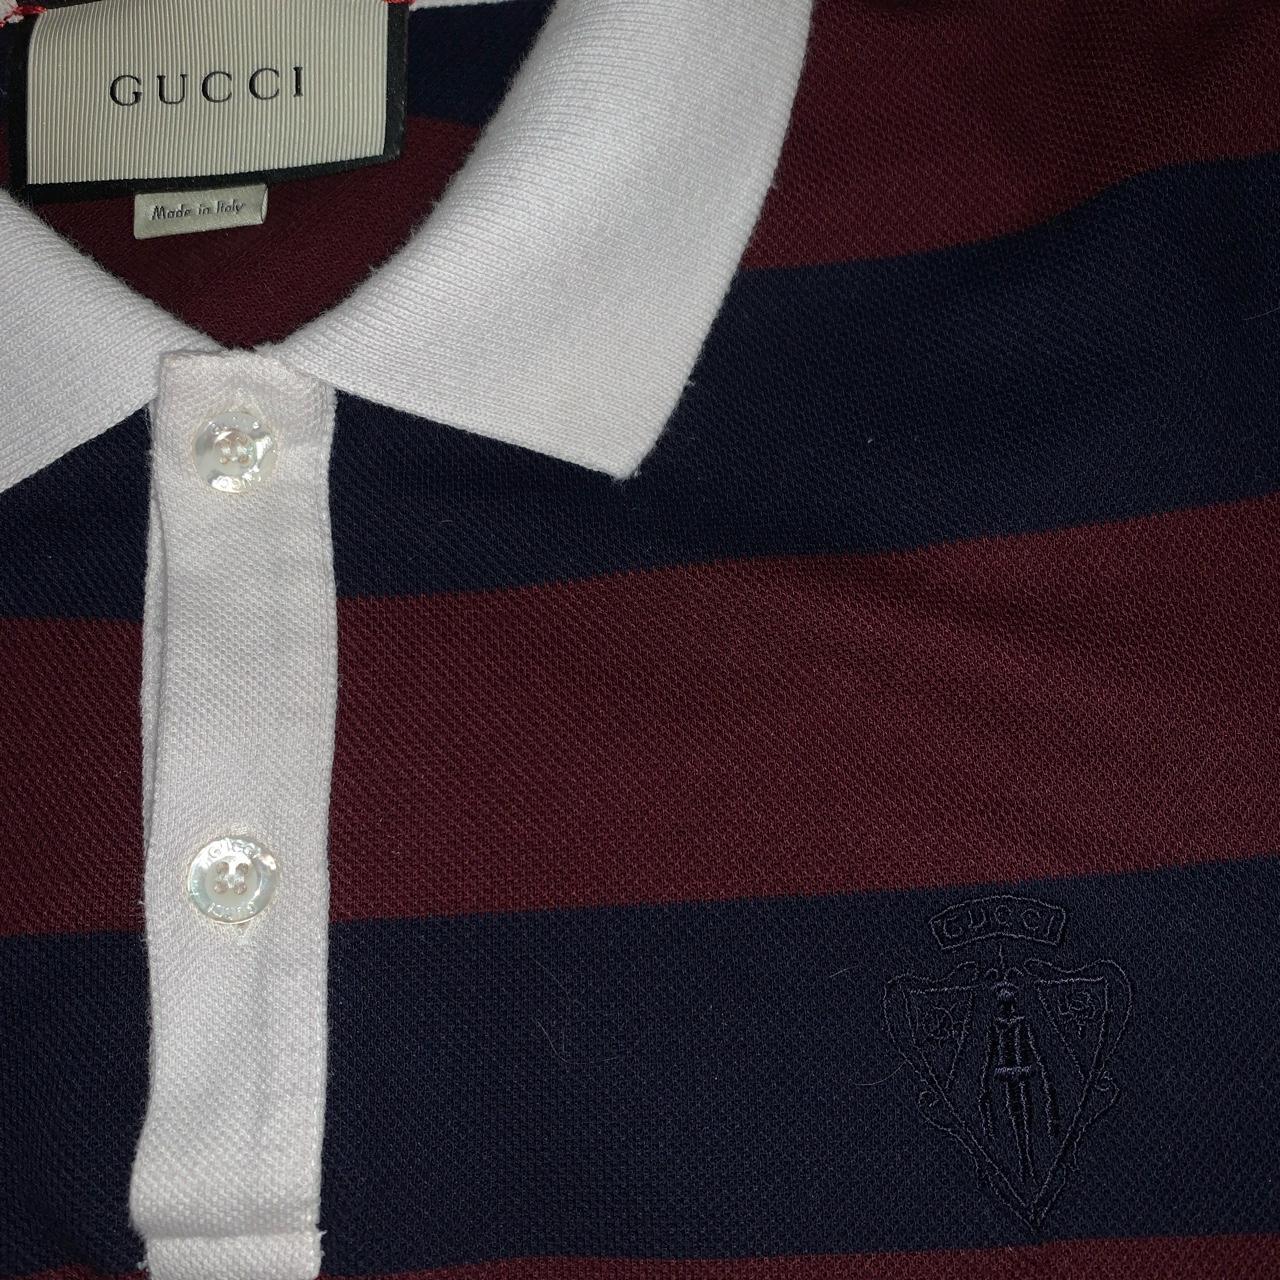 Authentic Gucci vintage polo shirt in mint condition...